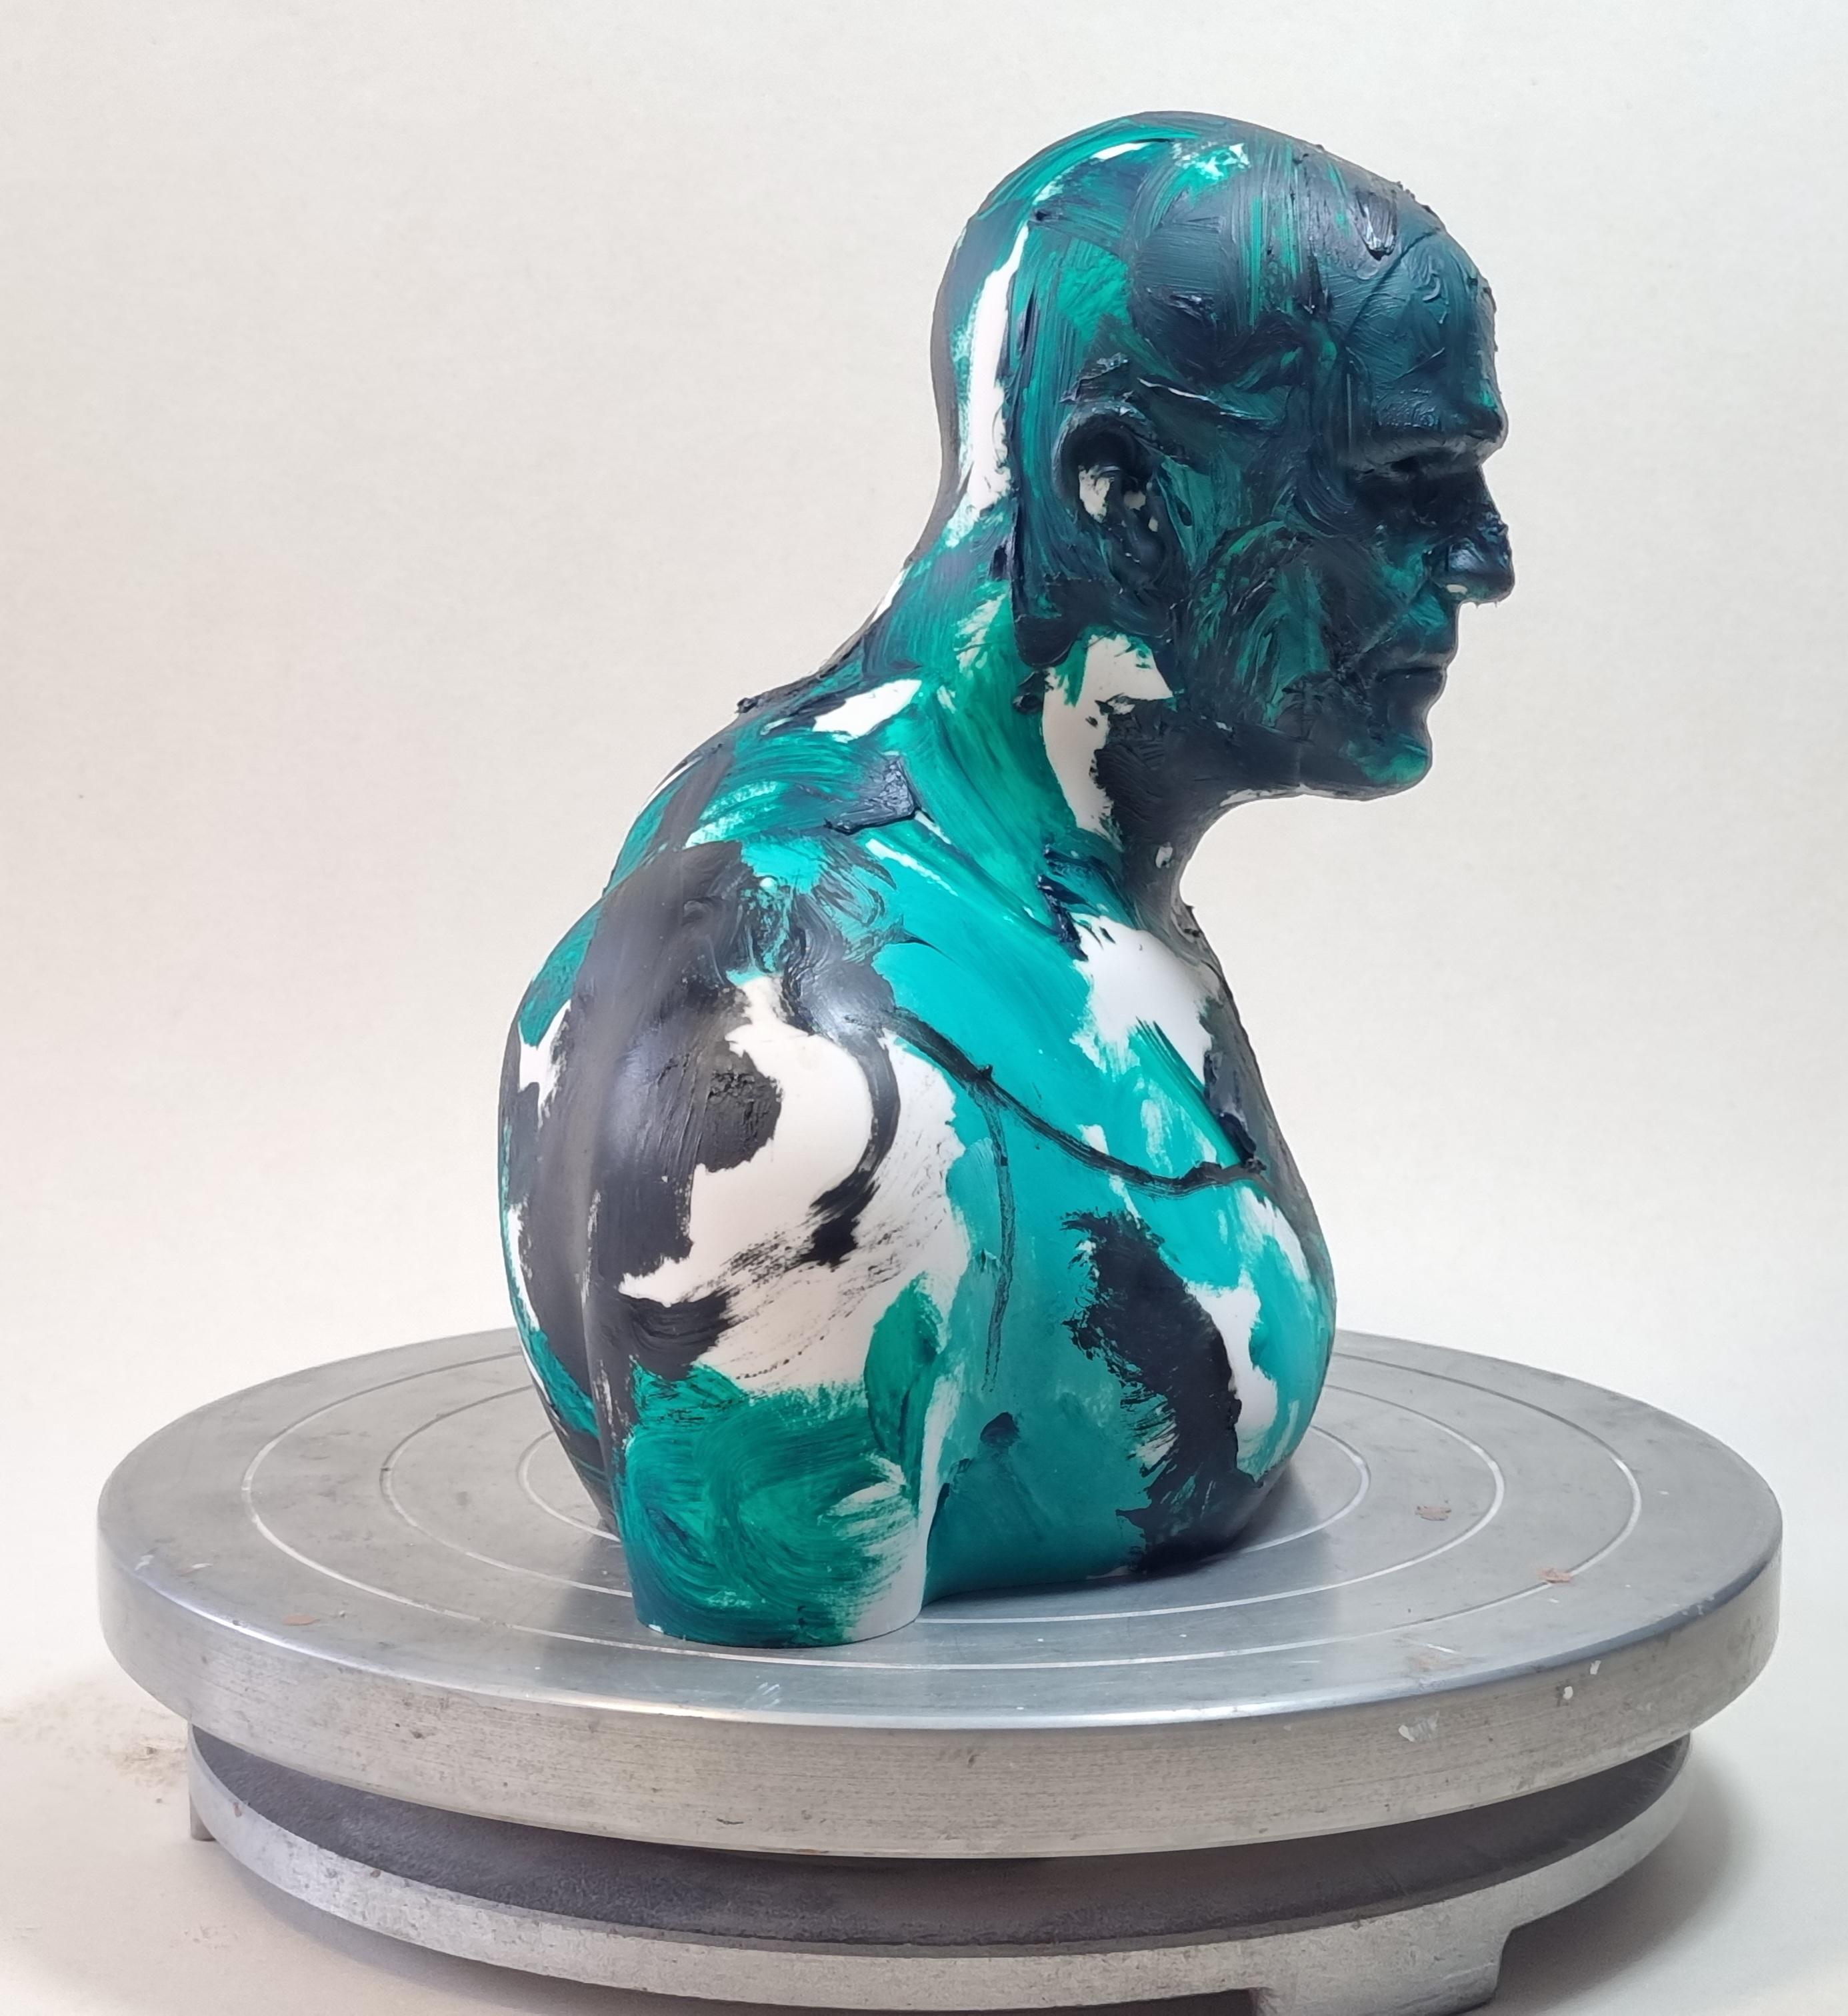 The sculpture was created and shaped by the artist using Acrylic One (which is an acrylic casting resin connection). The artist then painted this sculpture expressively with oil paint

Tomasz Bielak born in Lublin in 1967. He graduated  of The